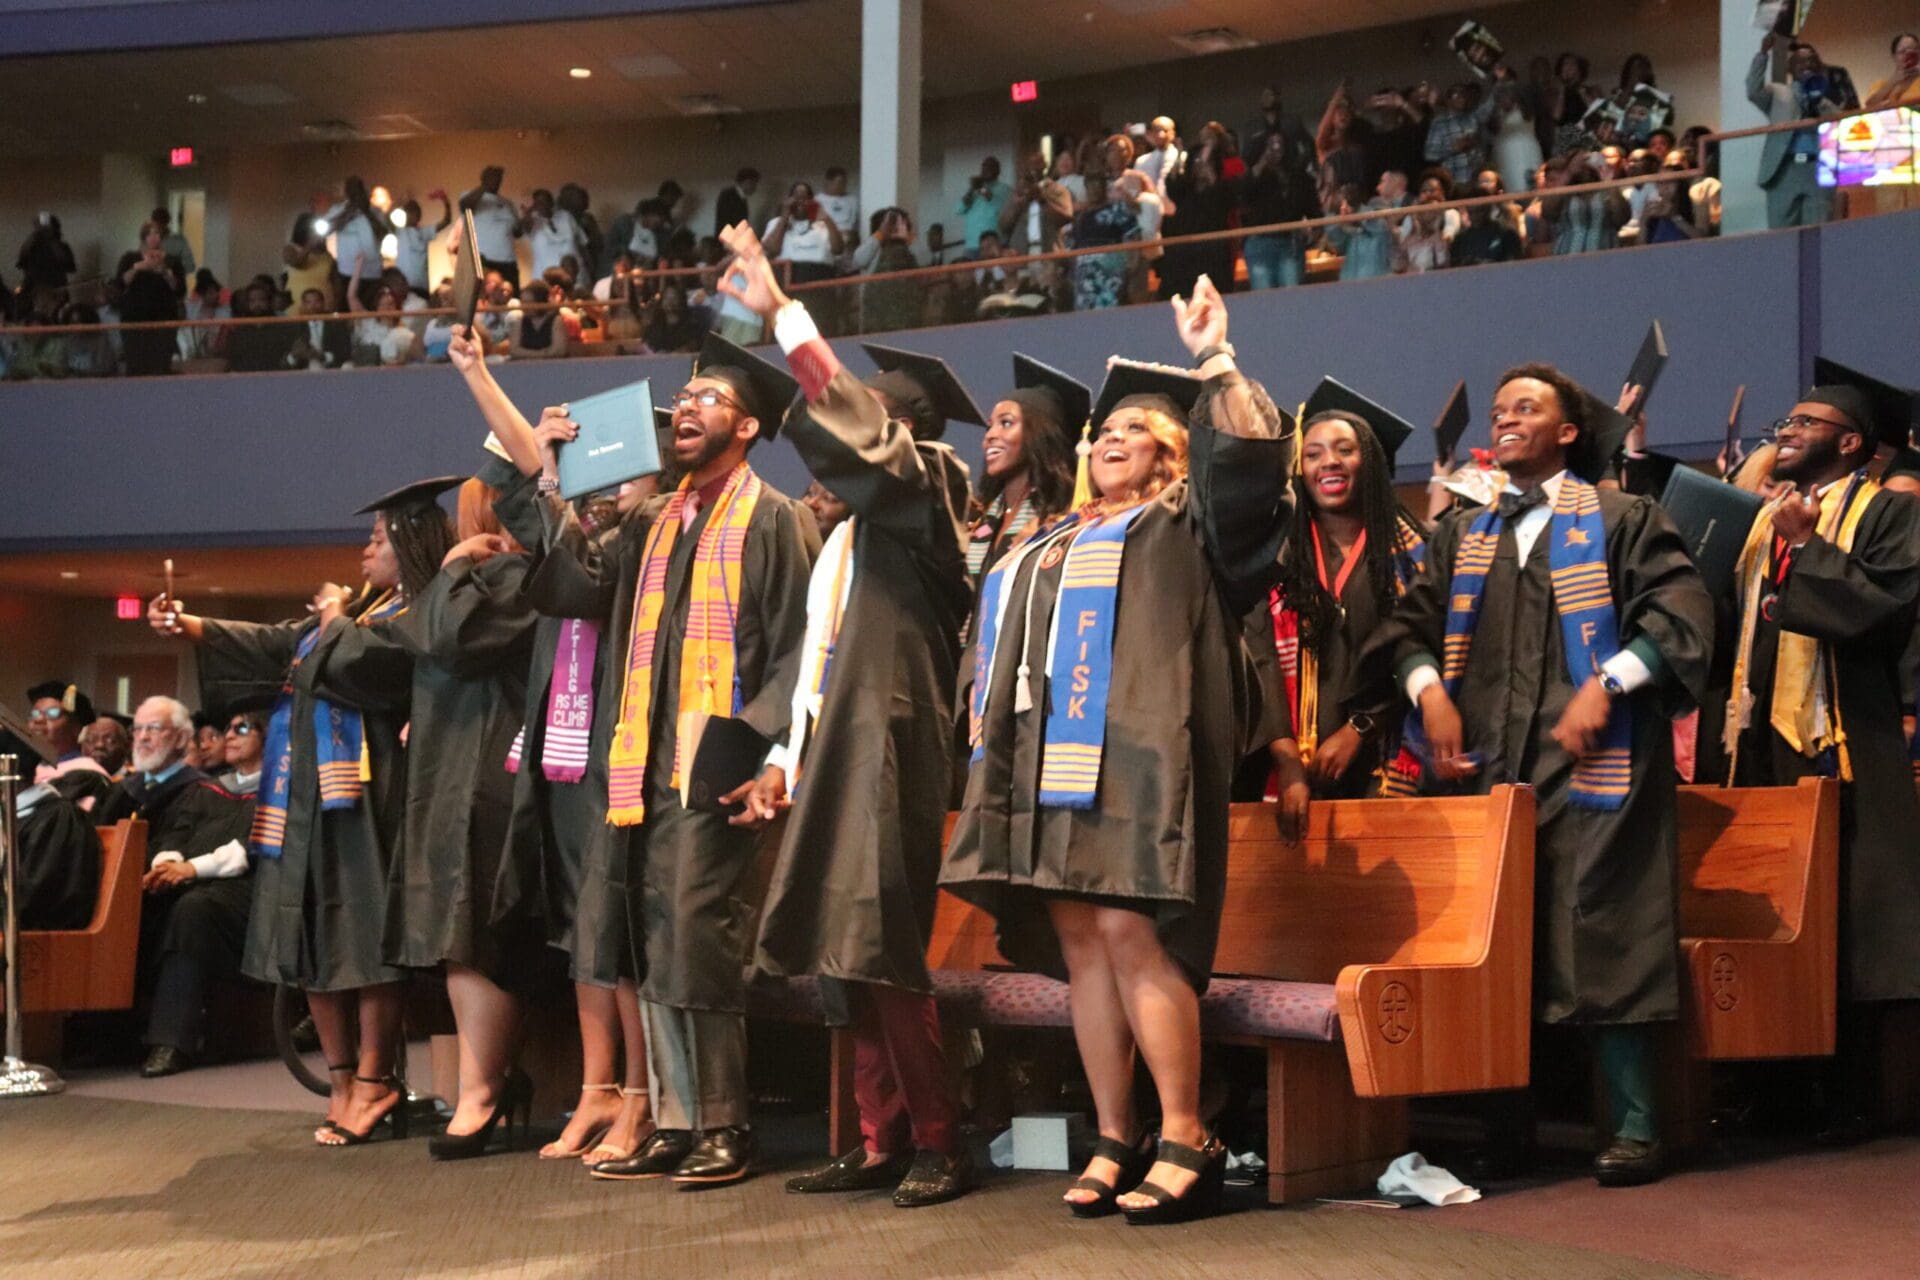 U.S. News & World Report Ranks Fisk 3rd among HBCUs with The Highest